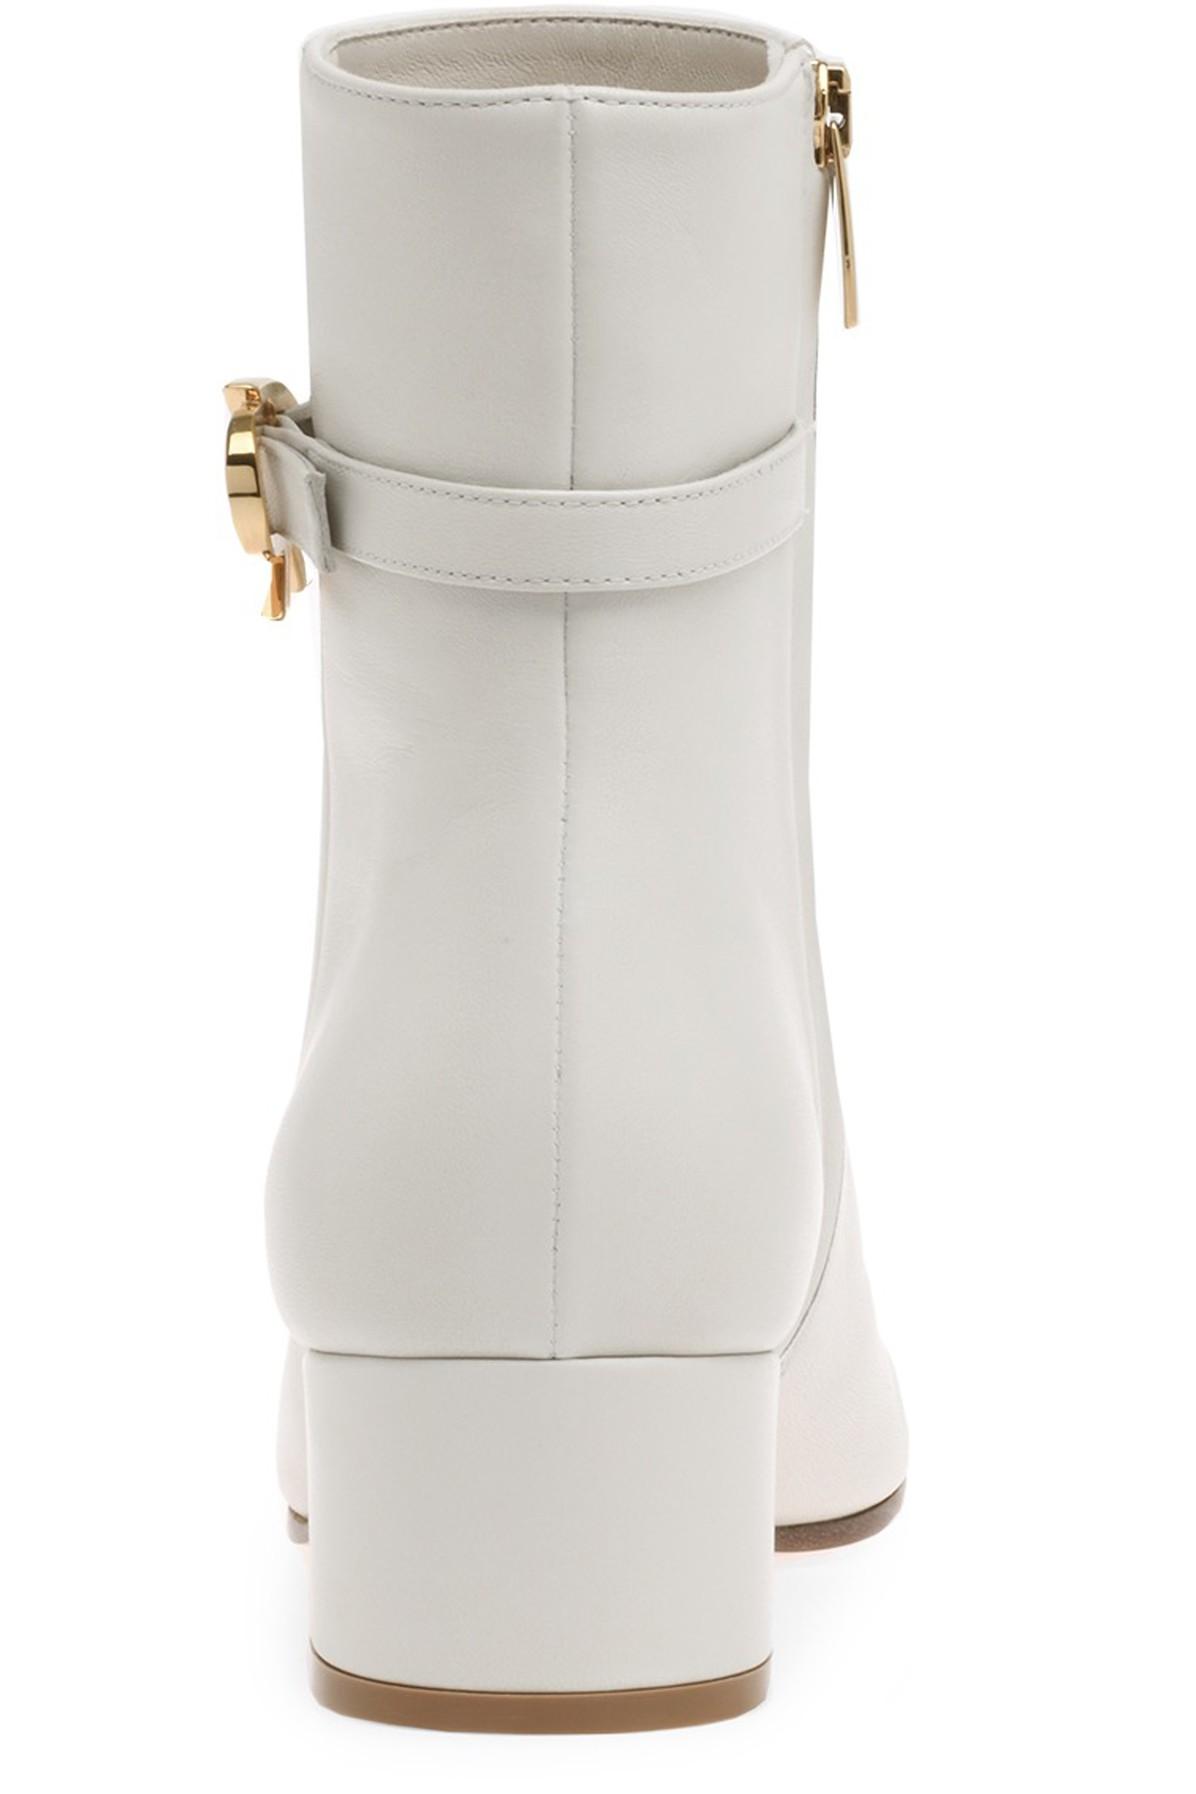 Gianvito Rossi Leather Ribbon Boots in White - Lyst